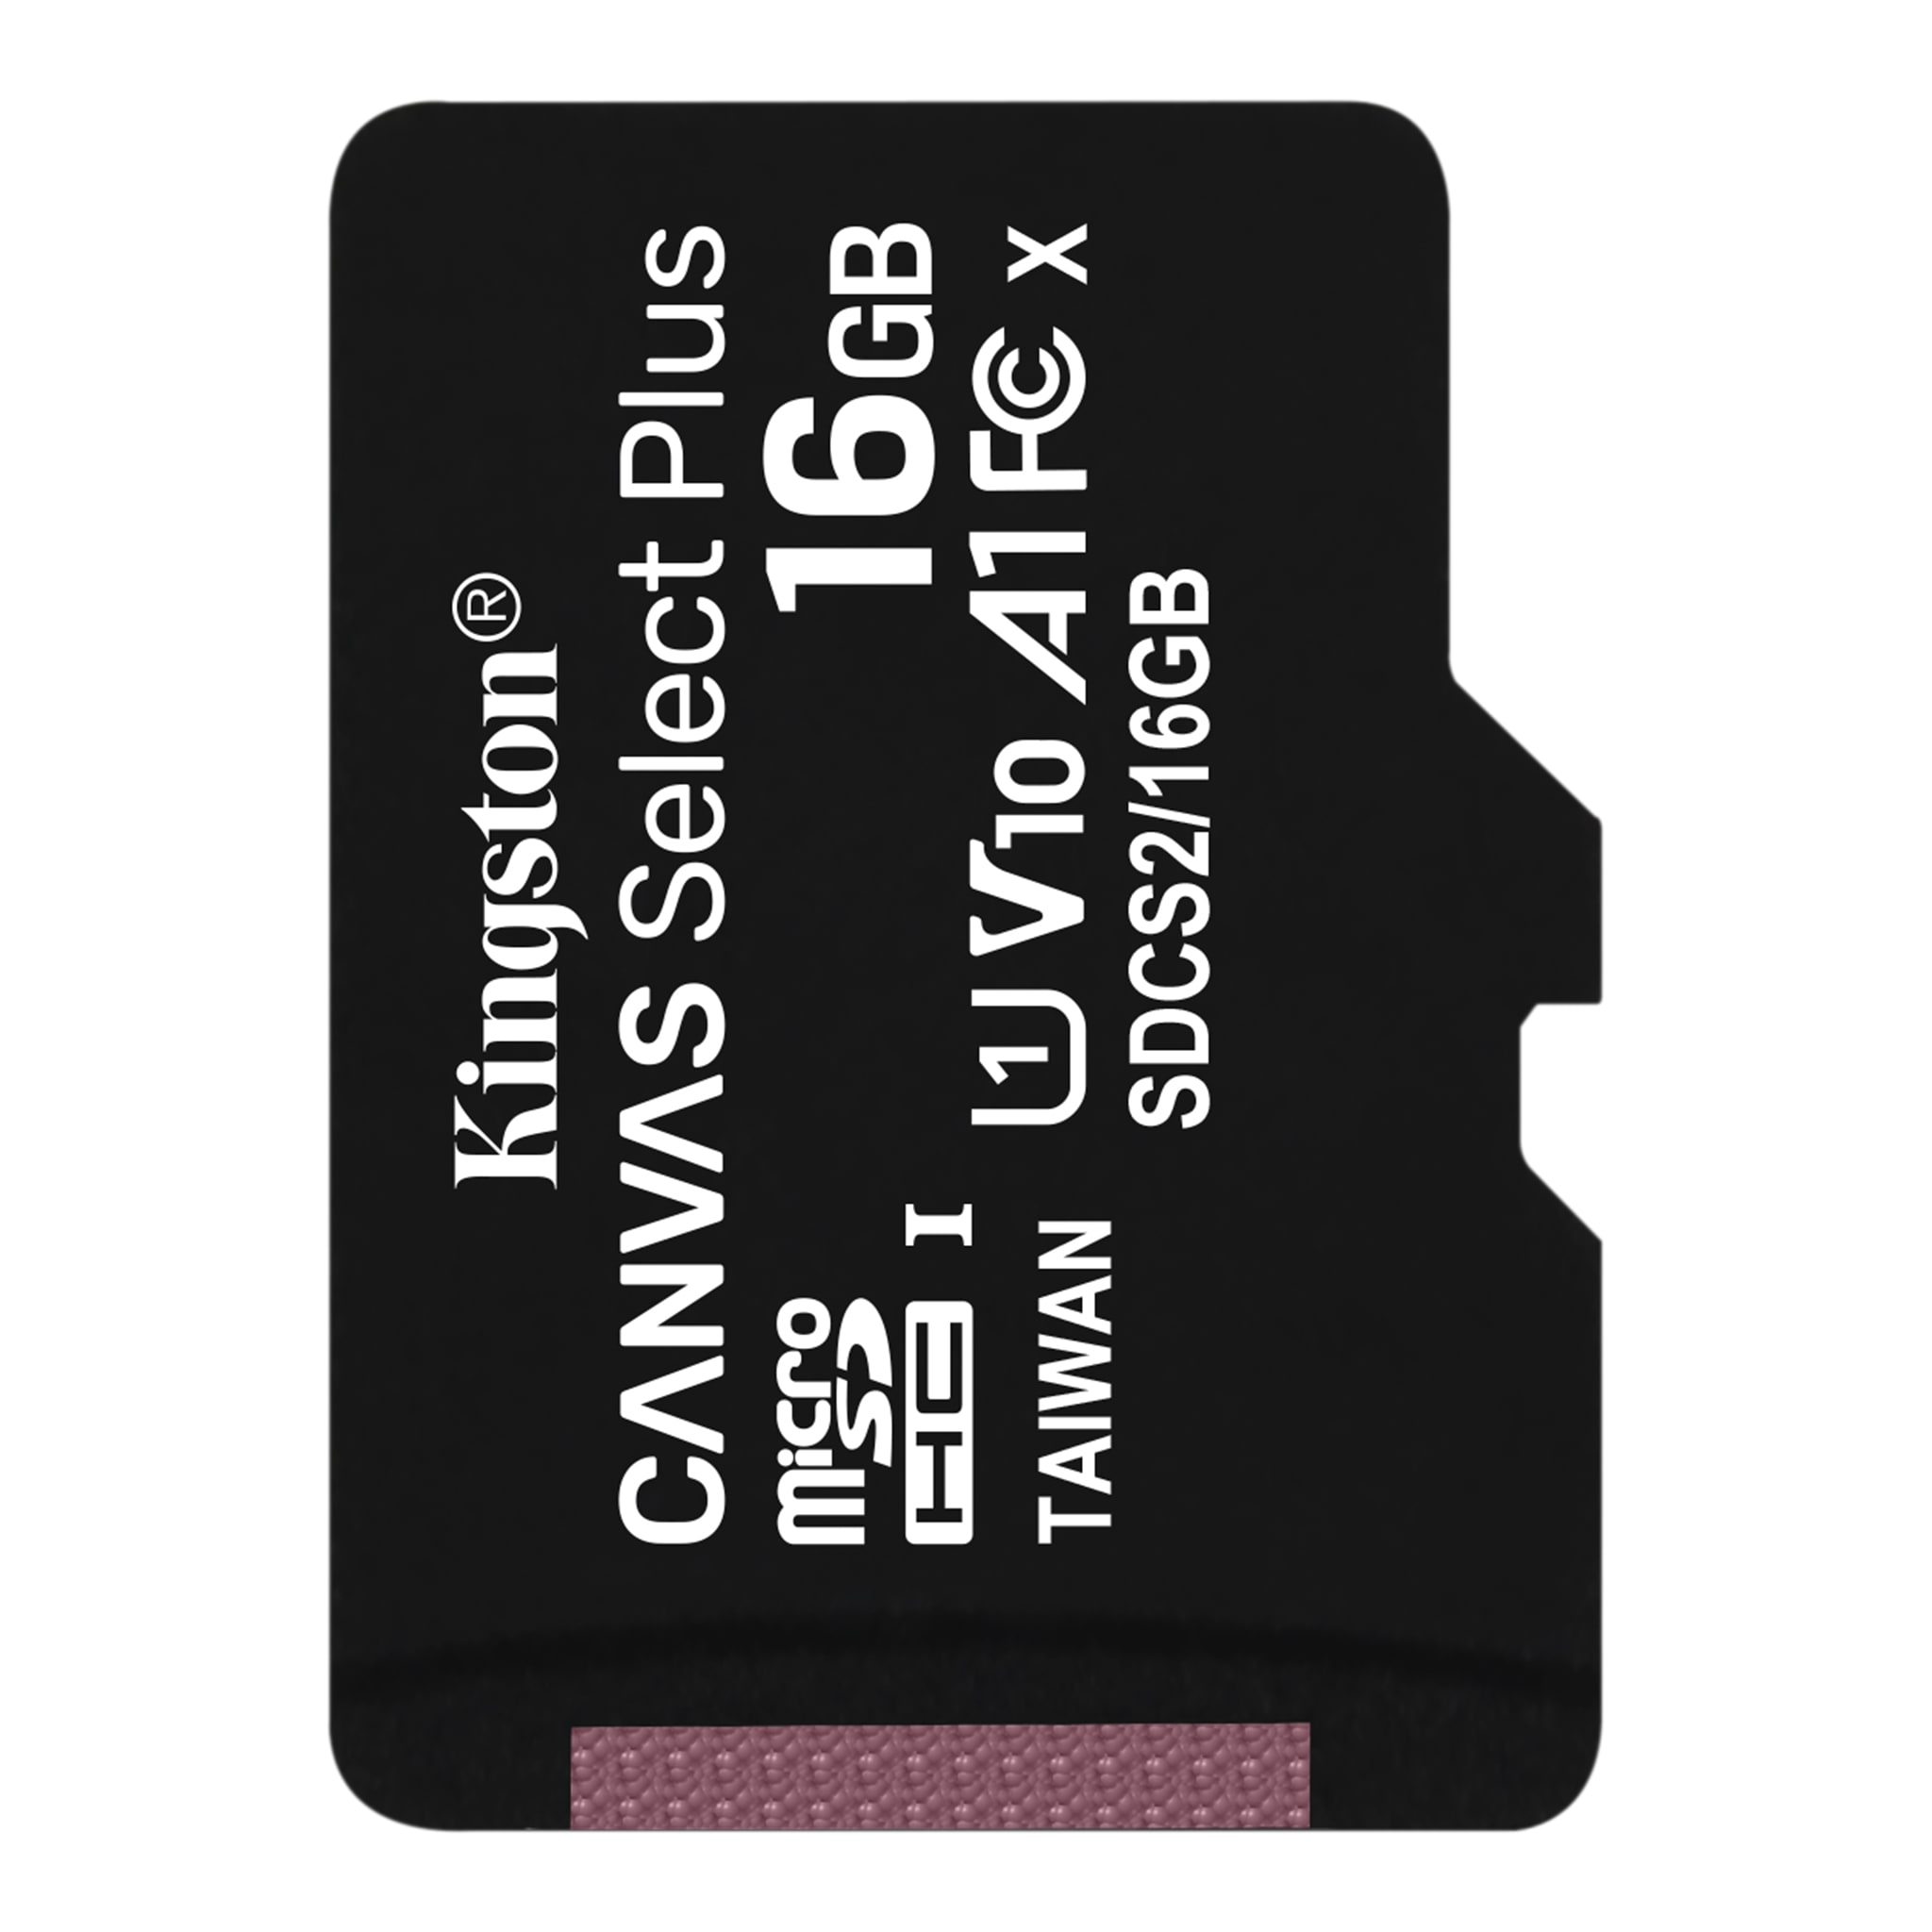 100MBs Works with Kingston Kingston 32GB Samsung Galaxy Amp Prime MicroSDHC Canvas Select Plus Card Verified by SanFlash. 